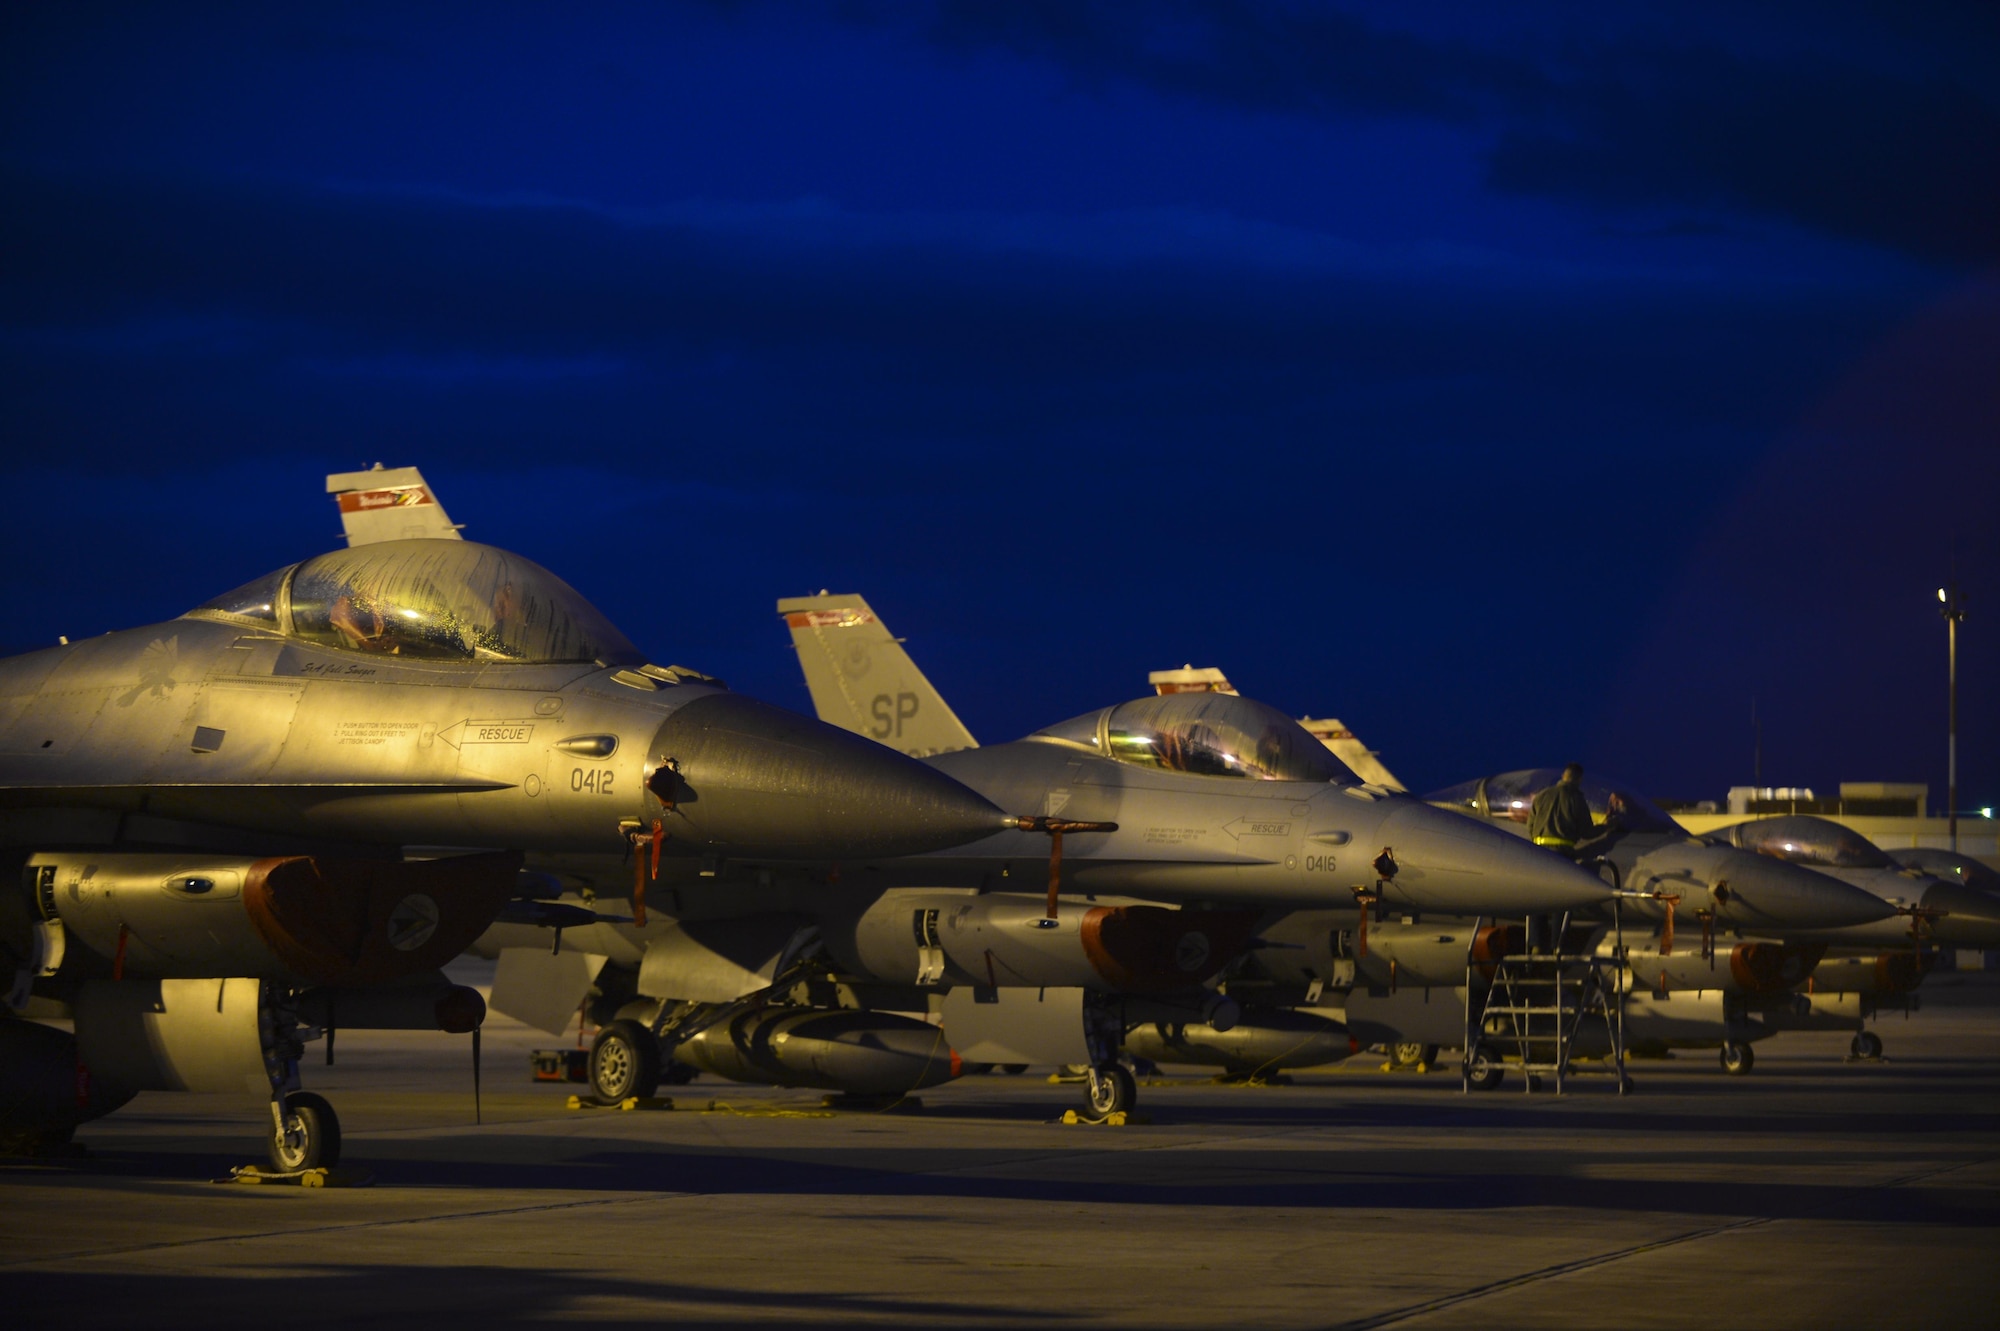 A row of U.S. Air Force F-16 Fighting Falcons remain parked on the flightline during a flying training deployment Jan. 30, 2015, at Souda Bay, Greece. The aircraft conducted the training as part of the bilateral deployment between the Hellenic and U.S. air forces to develop interoperability and cohesion between the two NATO partners. The F-16s are assigned to the 480th Expeditionary Fighter Squadron. (U.S. Air Force photo/Staff Sgt. Joe W. McFadden)